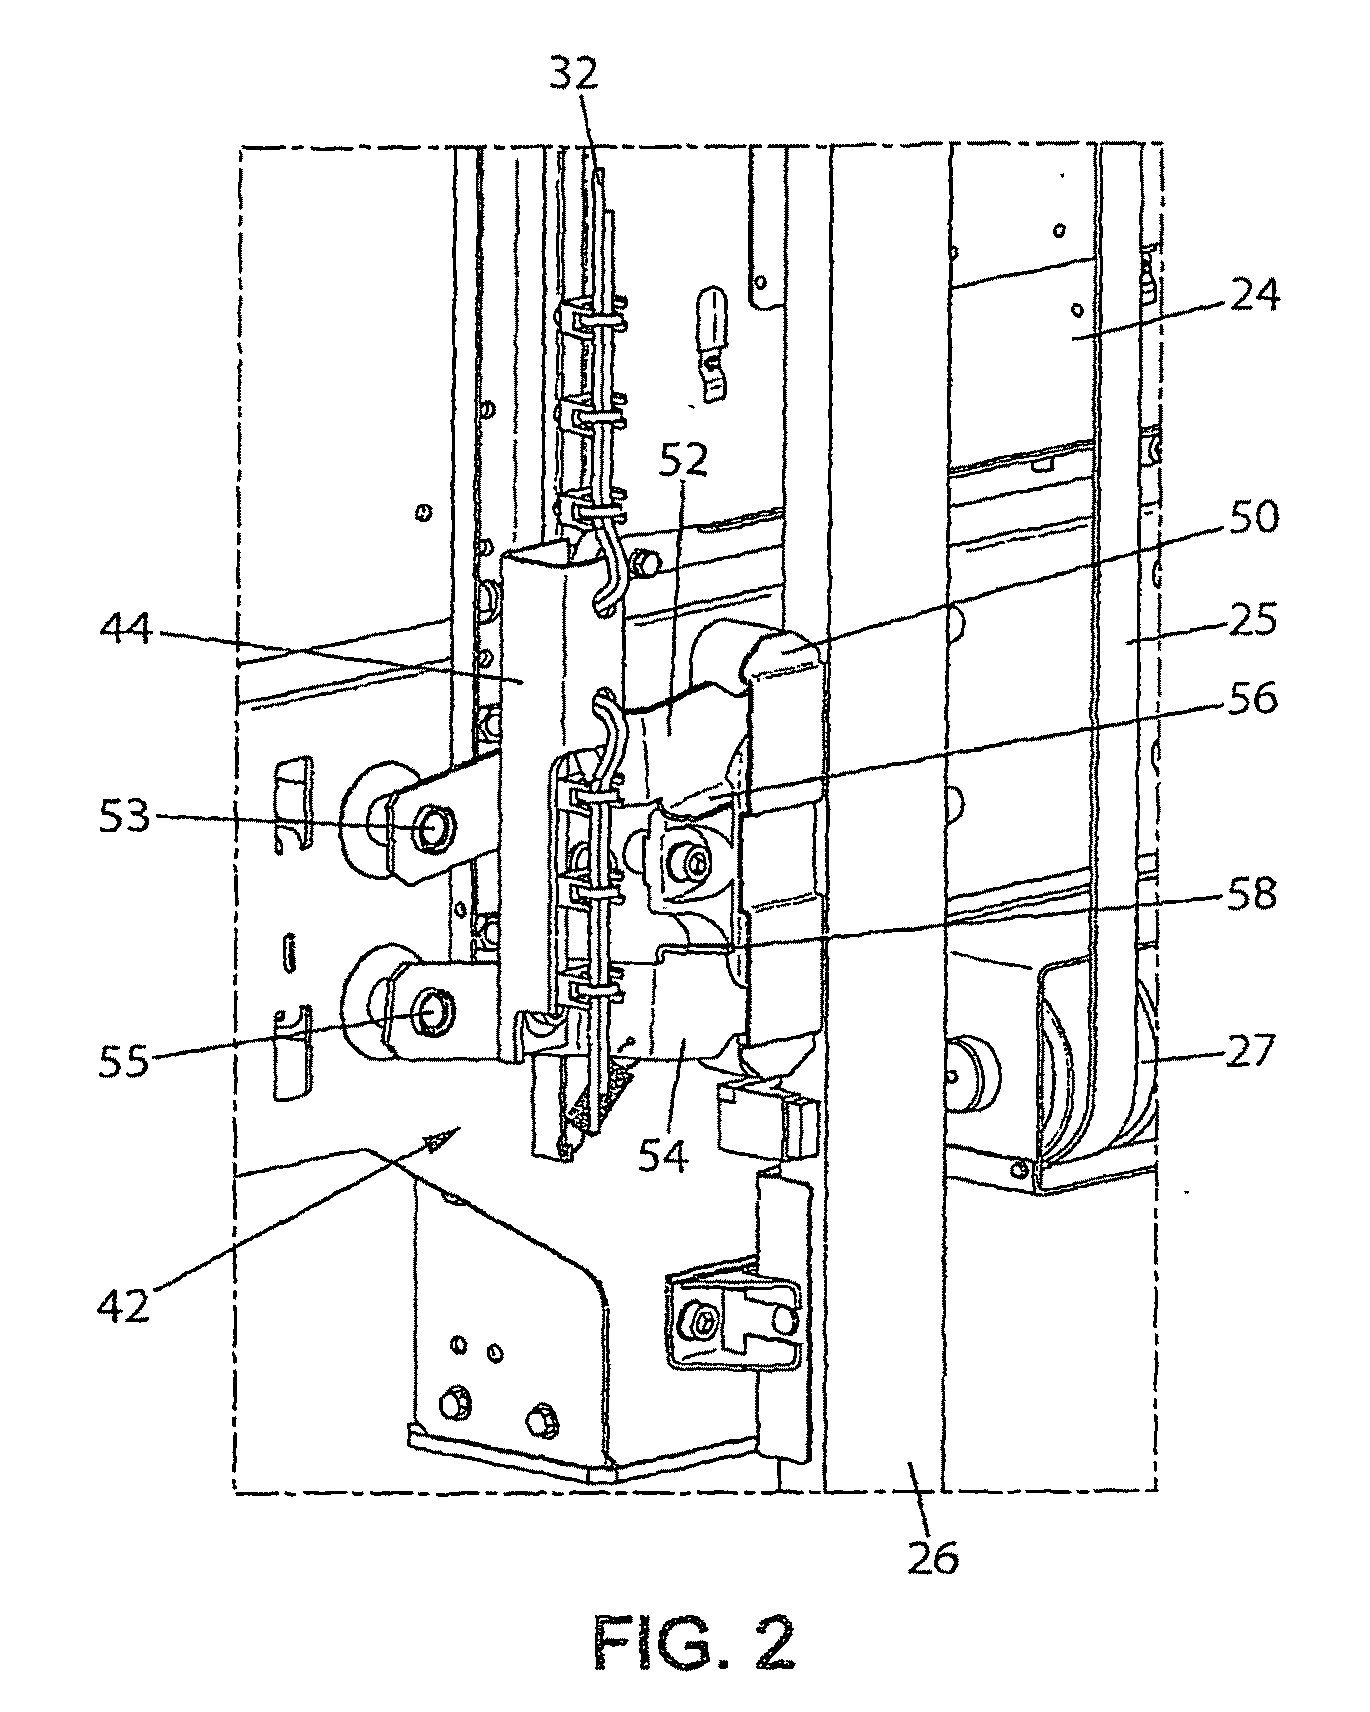 Safety device for securing minimum spaces at the top or bottom of an elevator shaft being inspected, and elevator having such safety devices